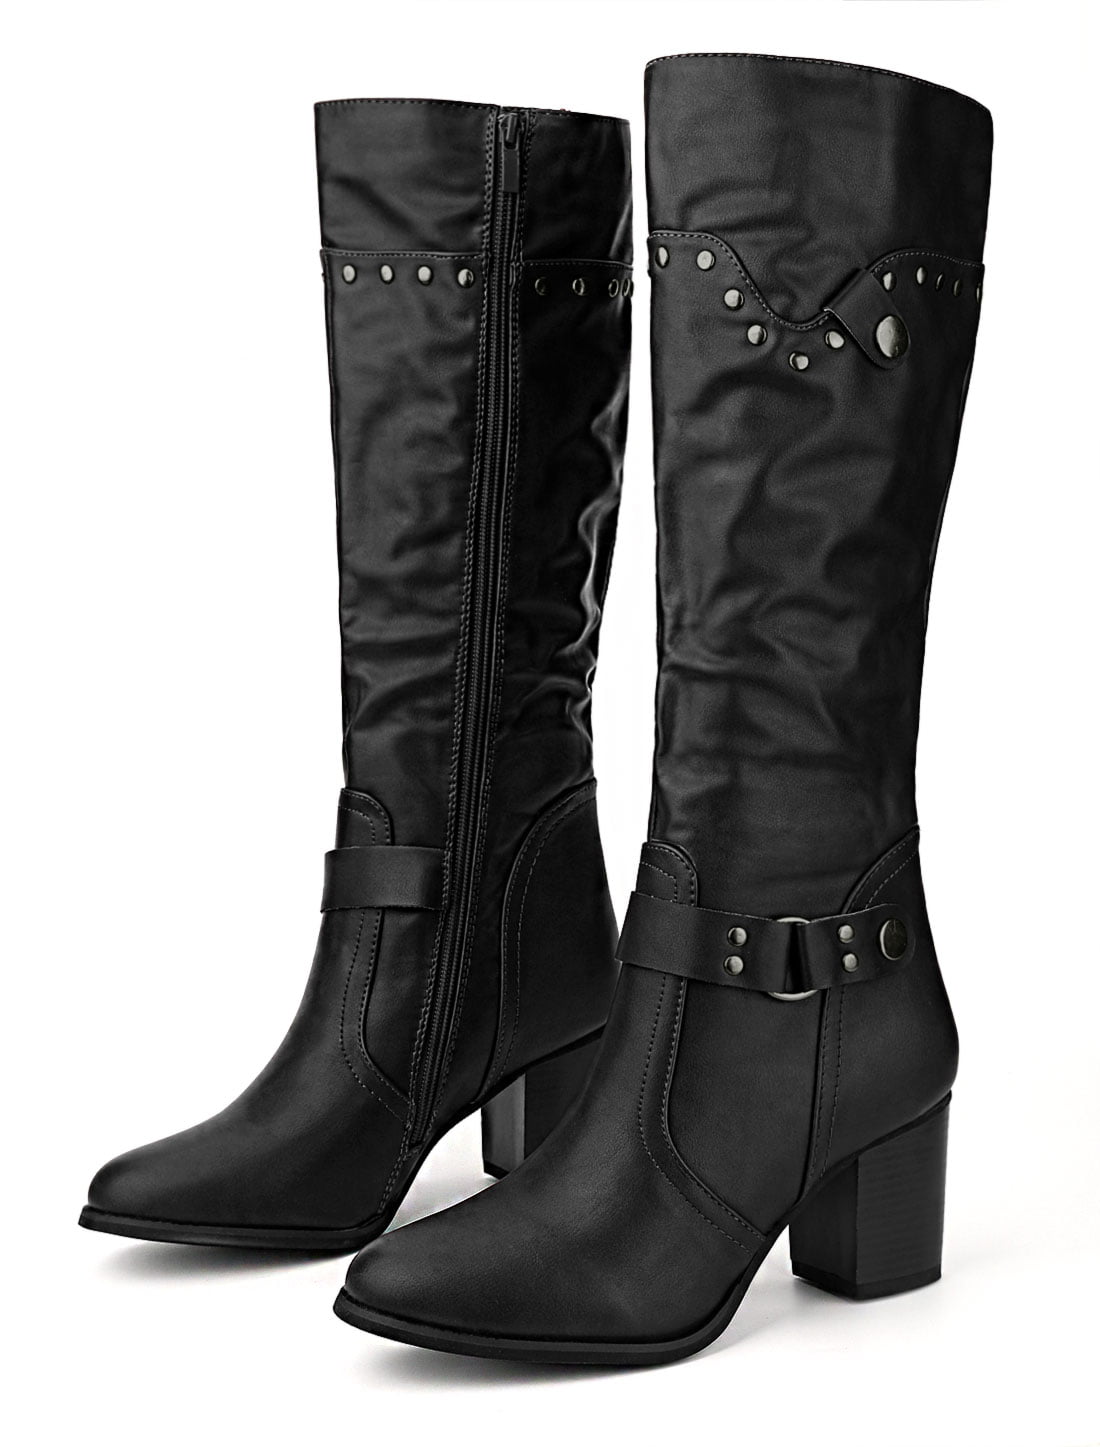 LACE UP RIDING STYLE BOOTS SHOES SIZE 3-8  NEW WOMENS BLOCK HEEL KNEE HIGH ZIP 